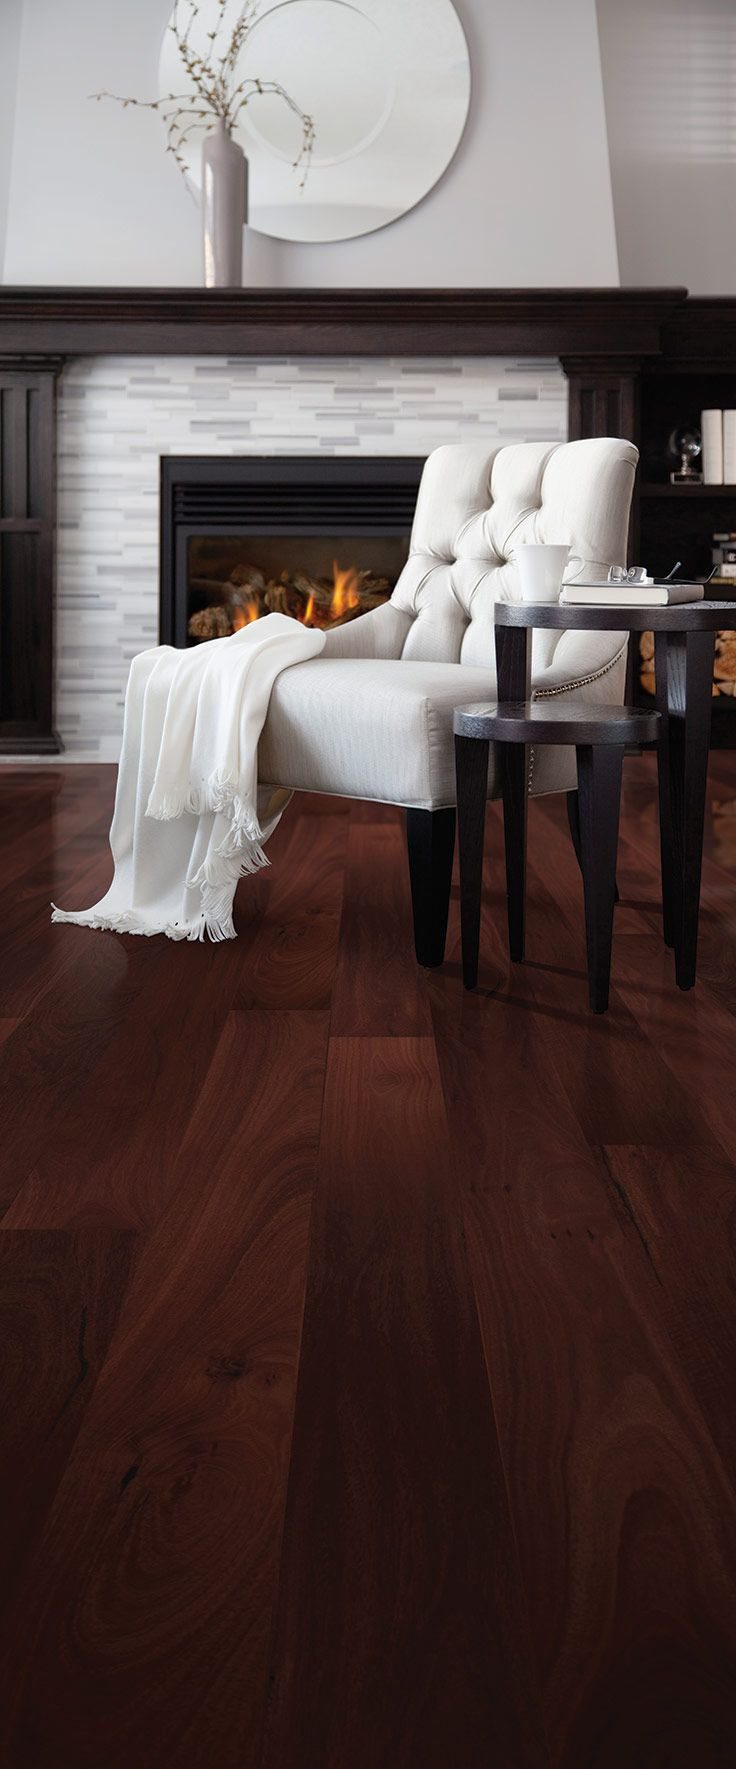 27 Lovely Hardwood Flooring Brick Nj 2024 free download hardwood flooring brick nj of godfrey hirst timber flooring get the look with timber naturals within godfrey hirst timber flooring get the look with timber naturals in jarrah godfreyhistfloo